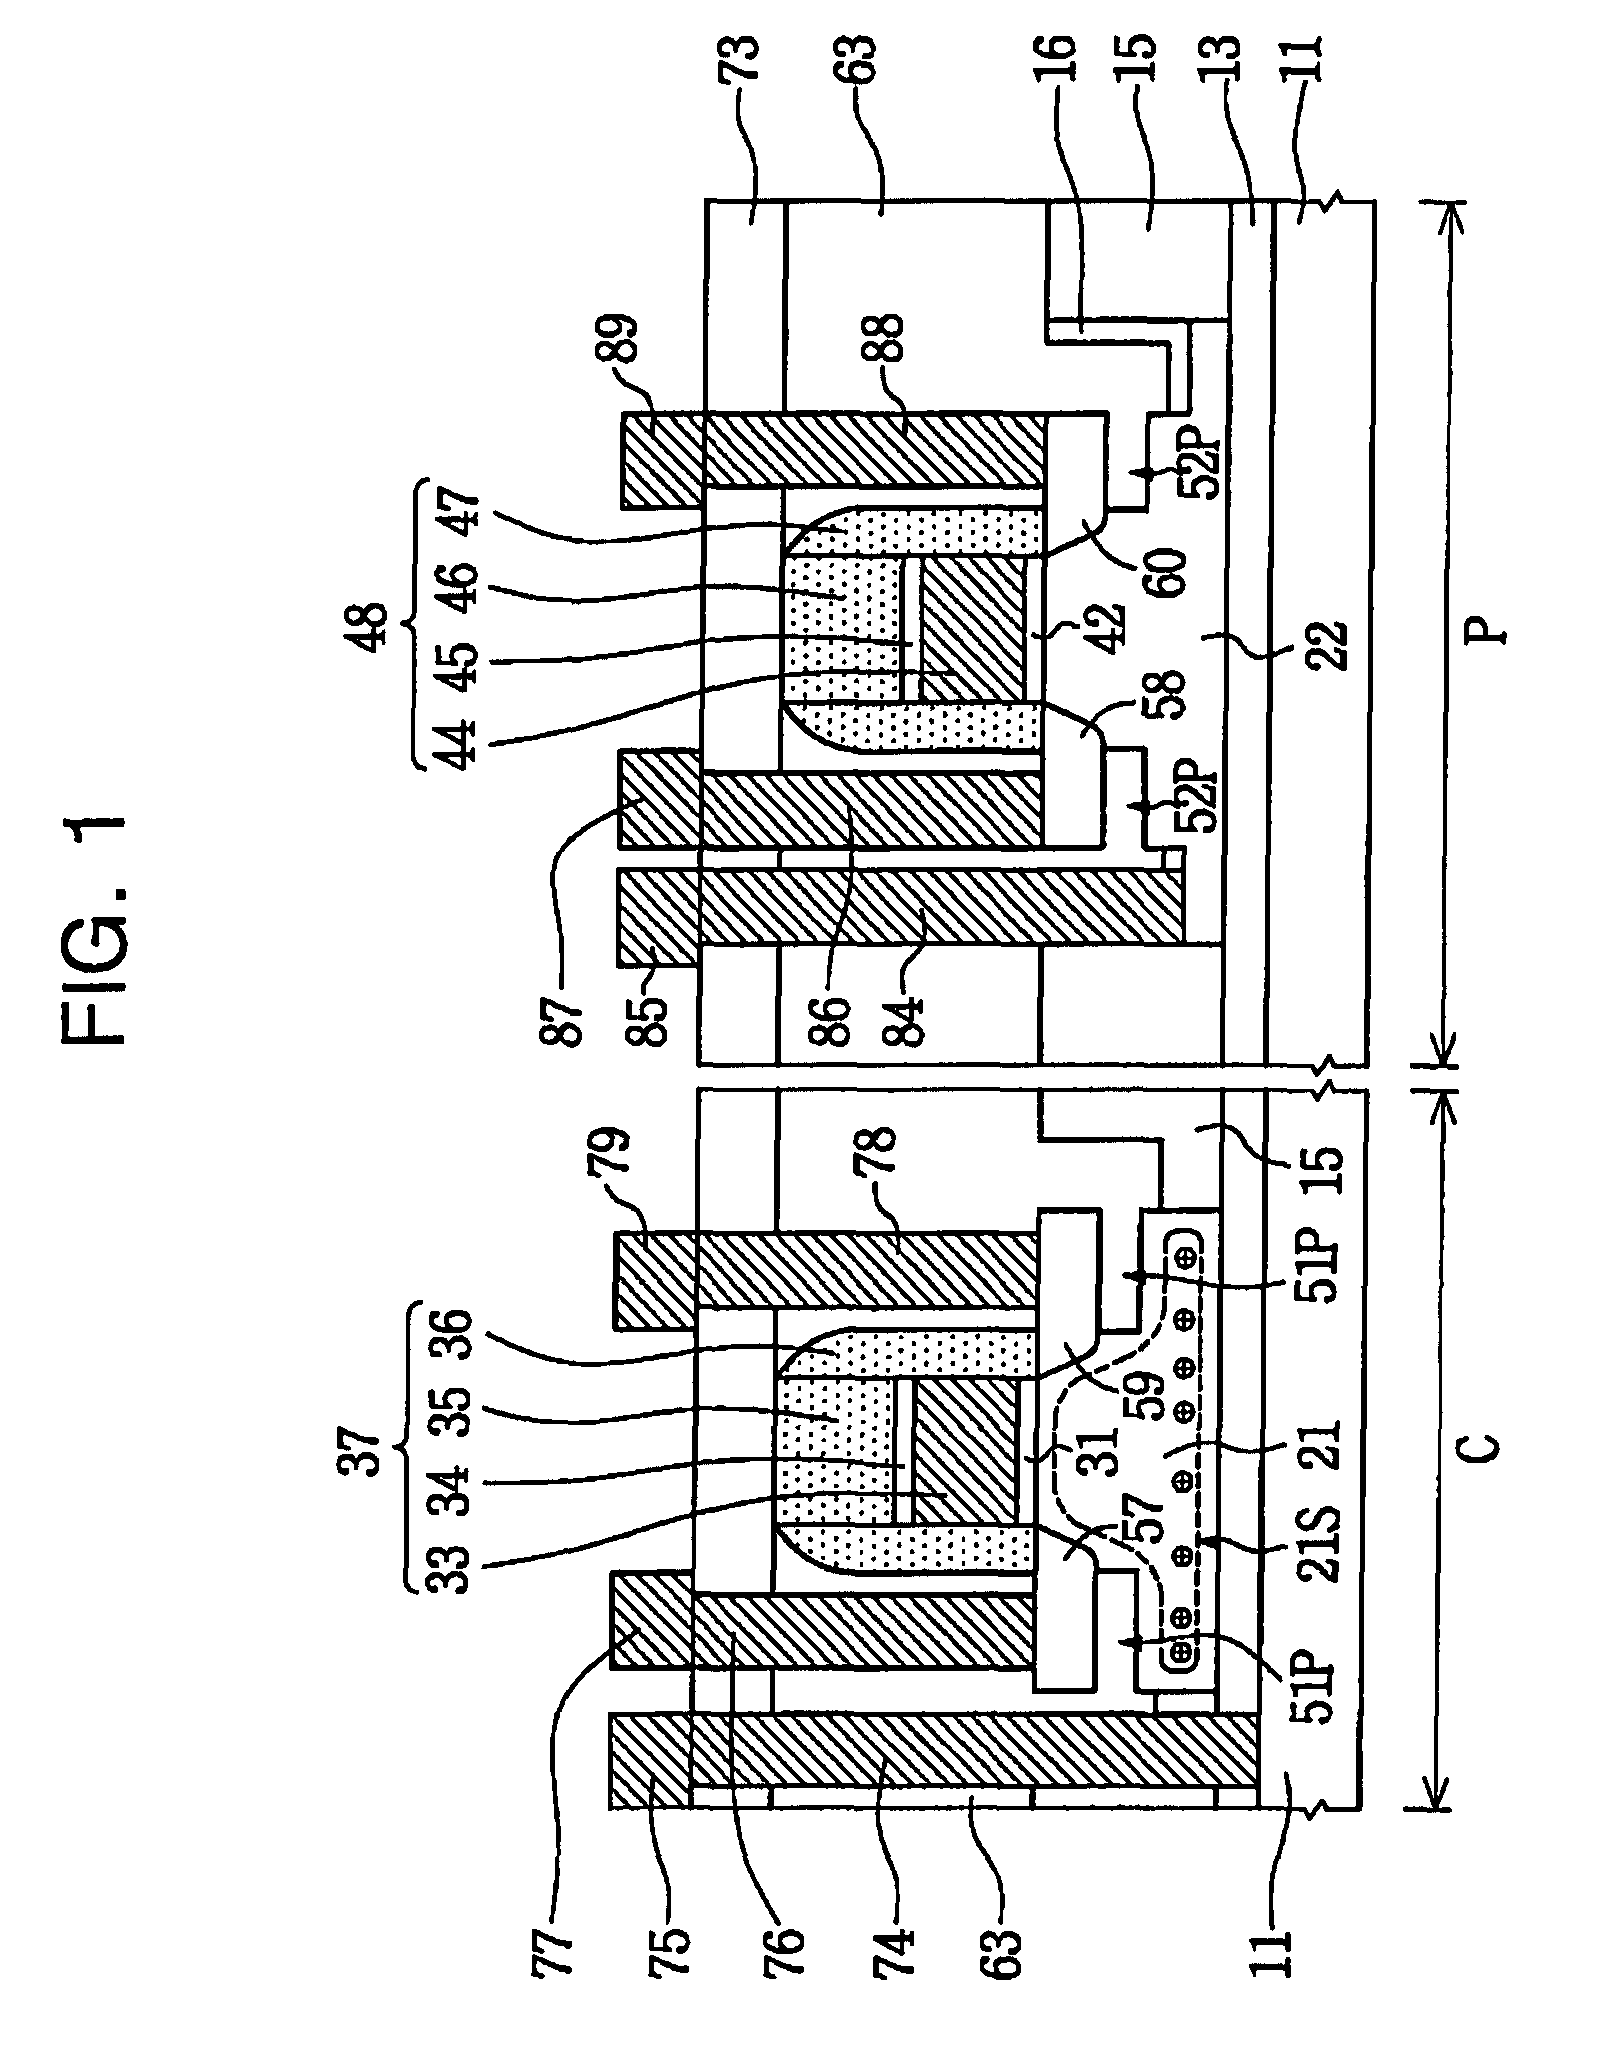 Floating body memory and method of fabricating the same